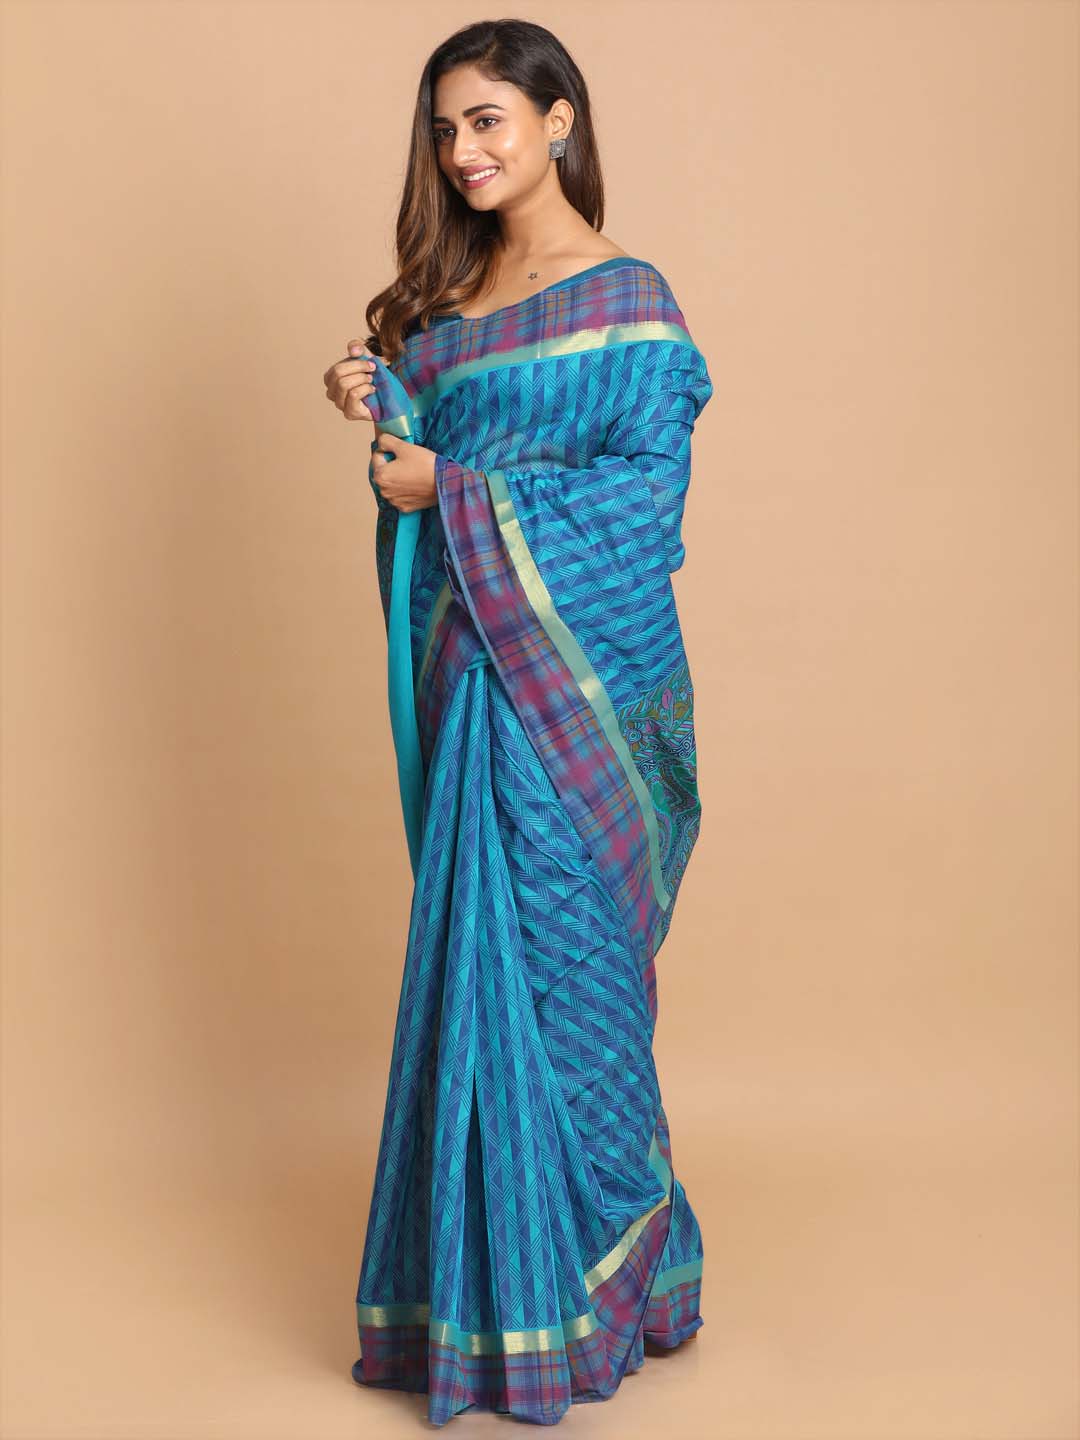 Indethnic Printed Cotton Blend Saree in Turquoise Blue - View 1